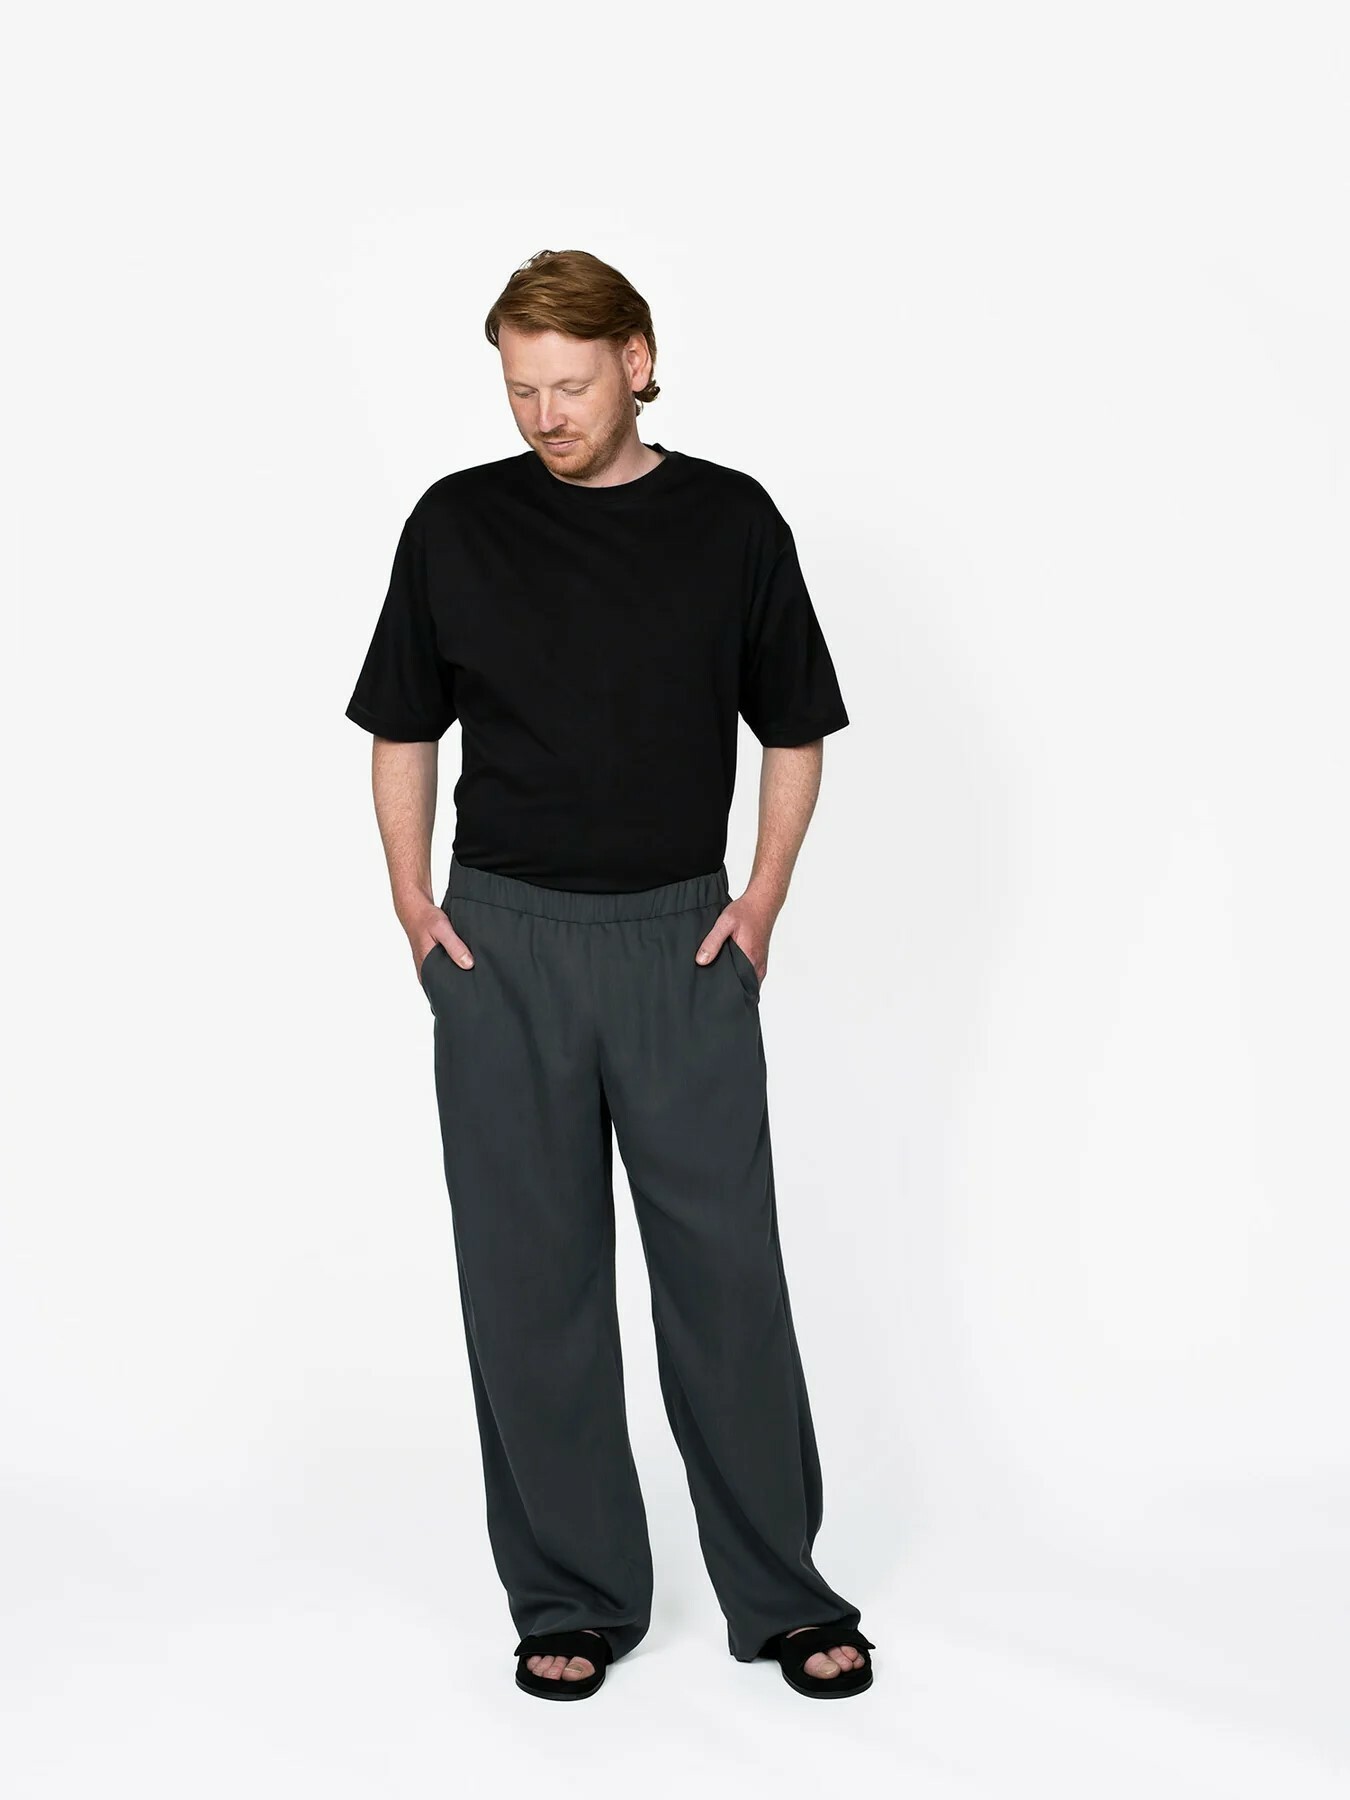 Buy The Assembly Line Pull On Trousers Sewing Pattern